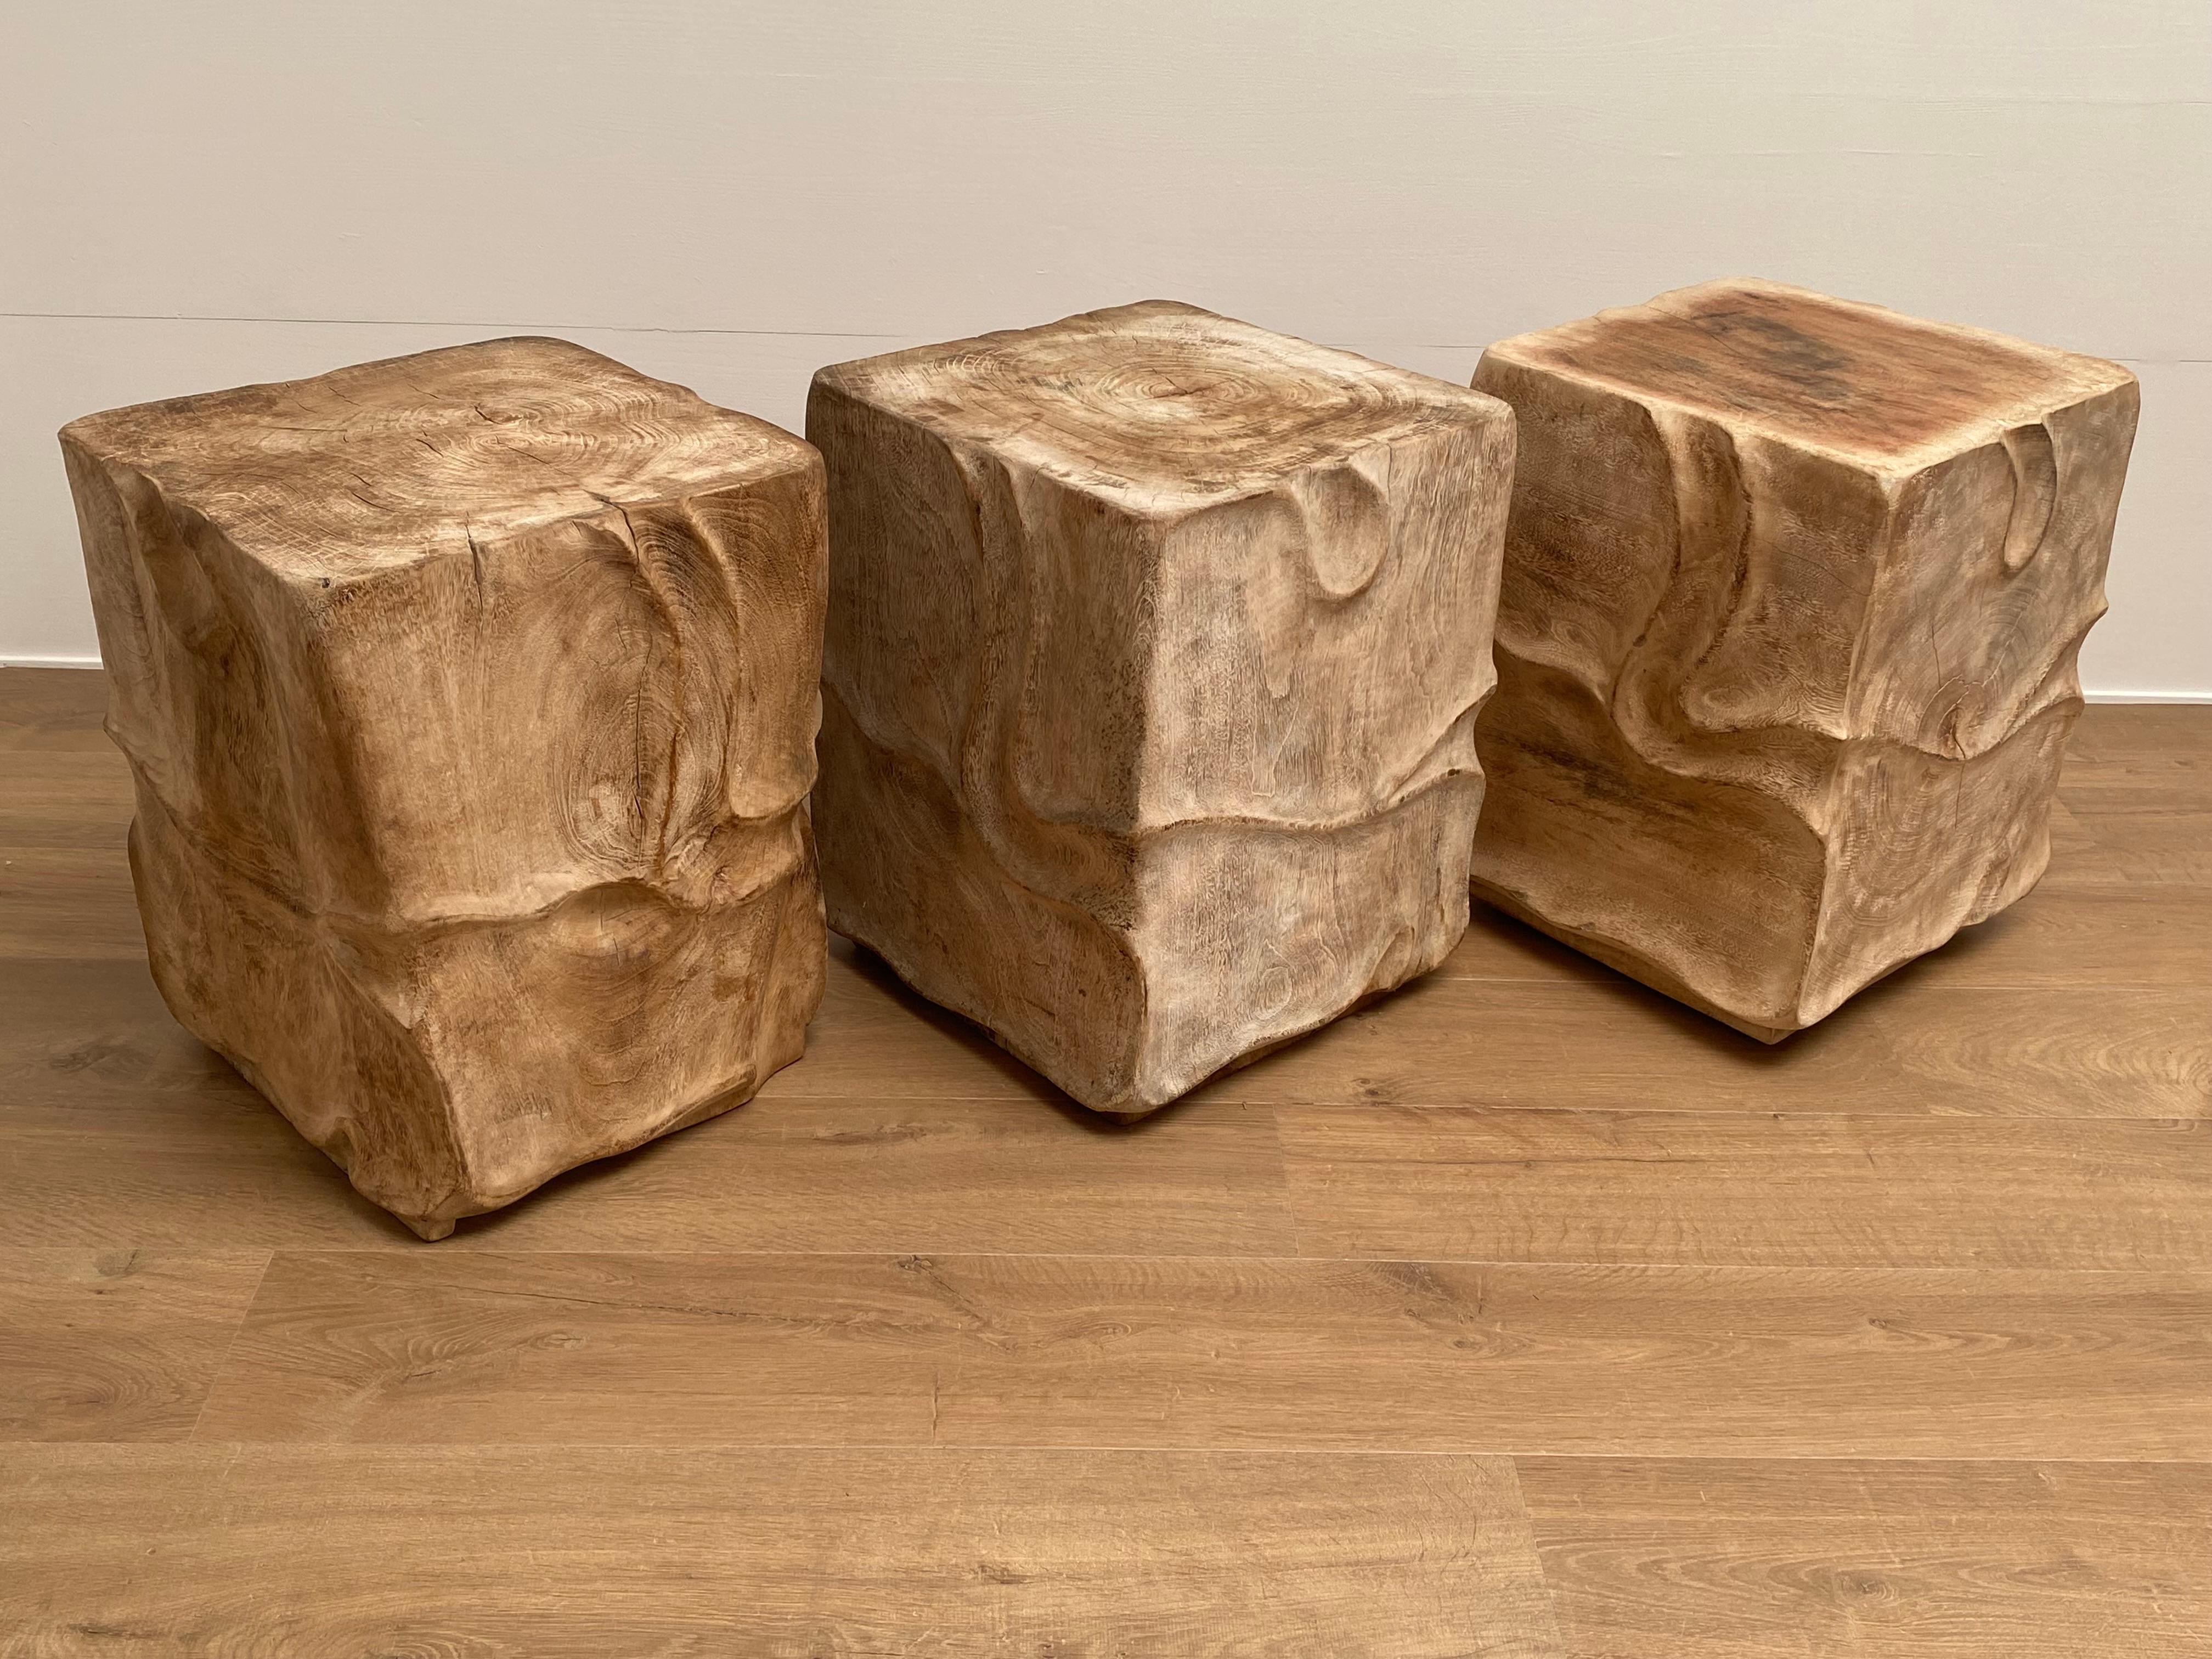  Set of 3 Rustic, Solid Wooden Blocks In Good Condition For Sale In Schellebelle, BE